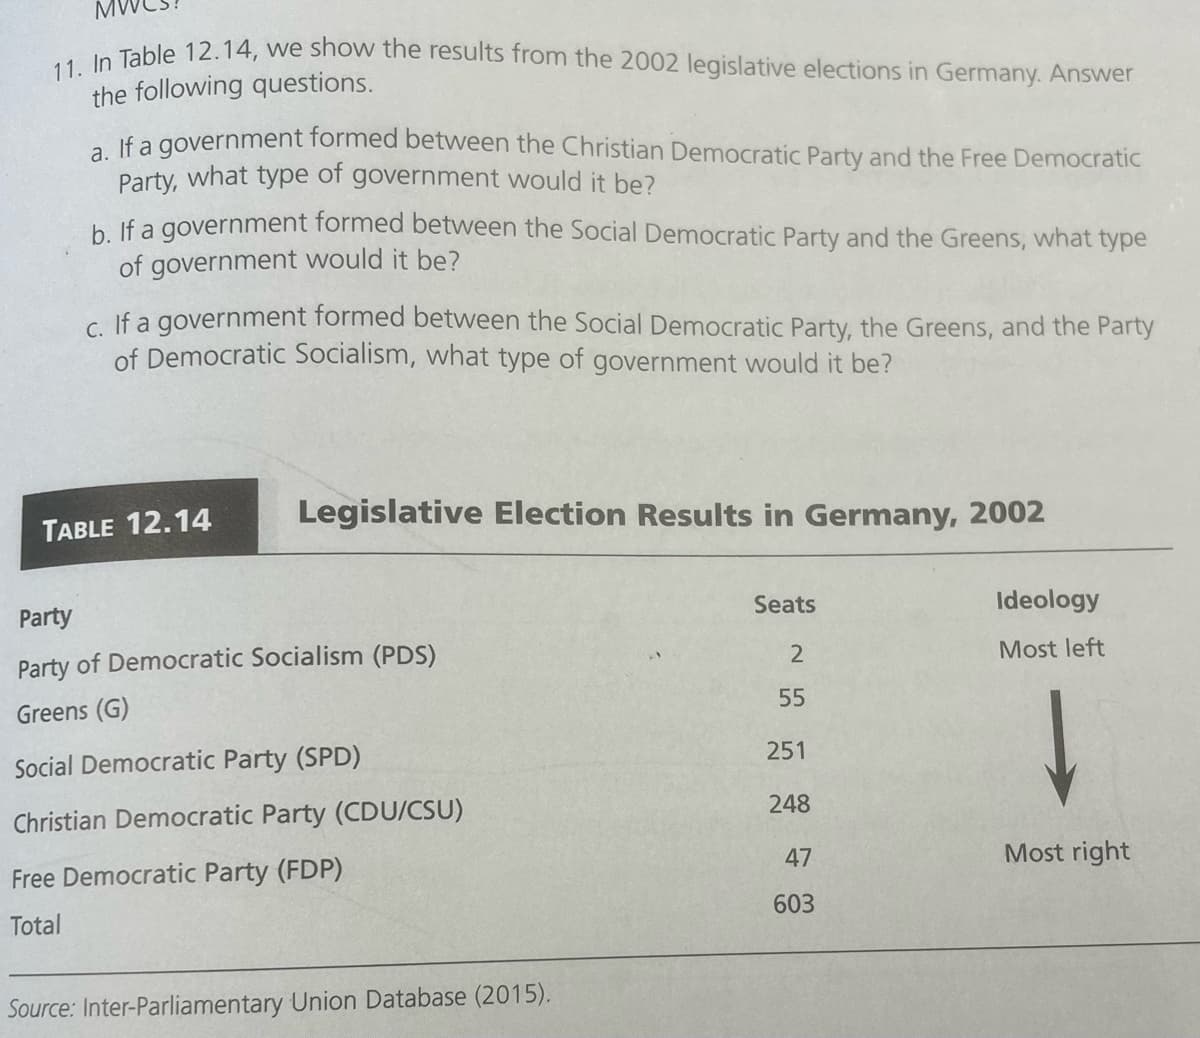 11. In Table 12.14, we show the results from the 2002 legislative elections in Germany. Answer
the following questions.
a. If a government formed between the Christian Democratic Party and the Free Democratic
Party, what type of government would it be?
b. If a government formed between the Social Democratic Party and the Greens, what type
of government would it be?
c. If a government formed between the Social Democratic Party, the Greens, and the Party
of Democratic Socialism, what type of government would it be?
TABLE 12.14
Legislative Election Results in Germany, 2002
Party
Seats
Ideology
Party of Democratic Socialism (PDS)
2
Most left
Greens (G)
55
Social Democratic Party (SPD)
251
Christian Democratic Party (CDU/CSU)
248
Free Democratic Party (FDP)
47
Most right
603
Total
Source: Inter-Parliamentary Union Database (2015).